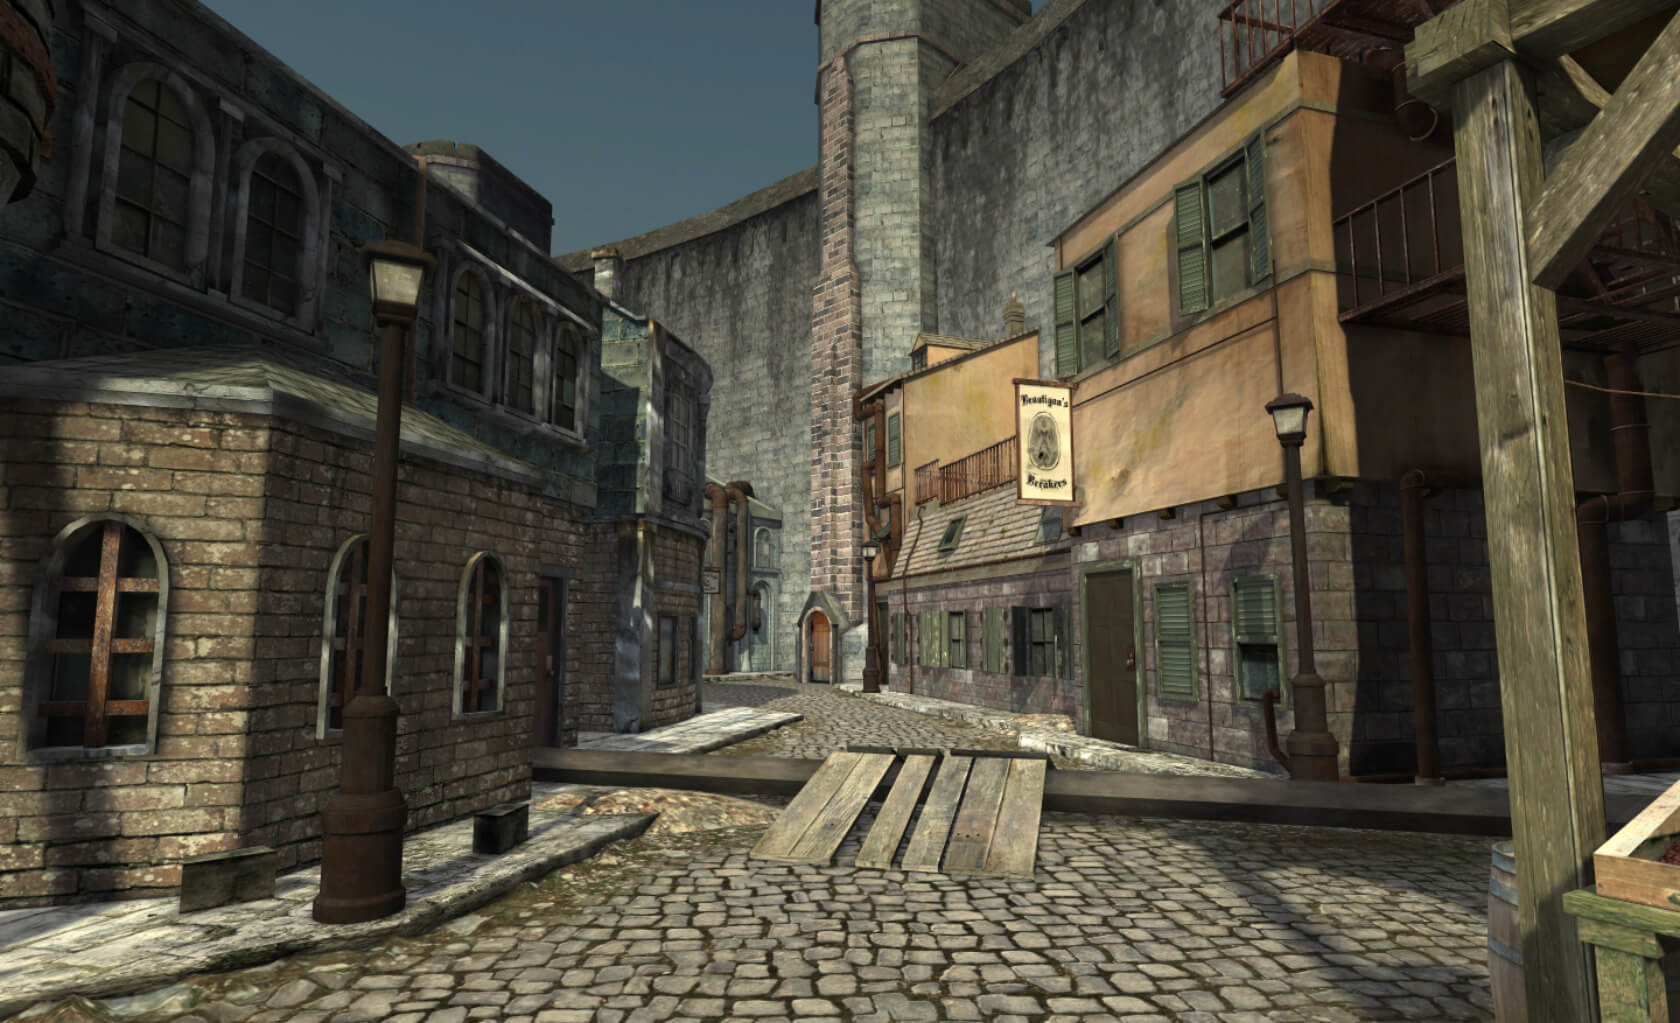 A first person game with the viewer observing an empty town street. Grey colors throughout.